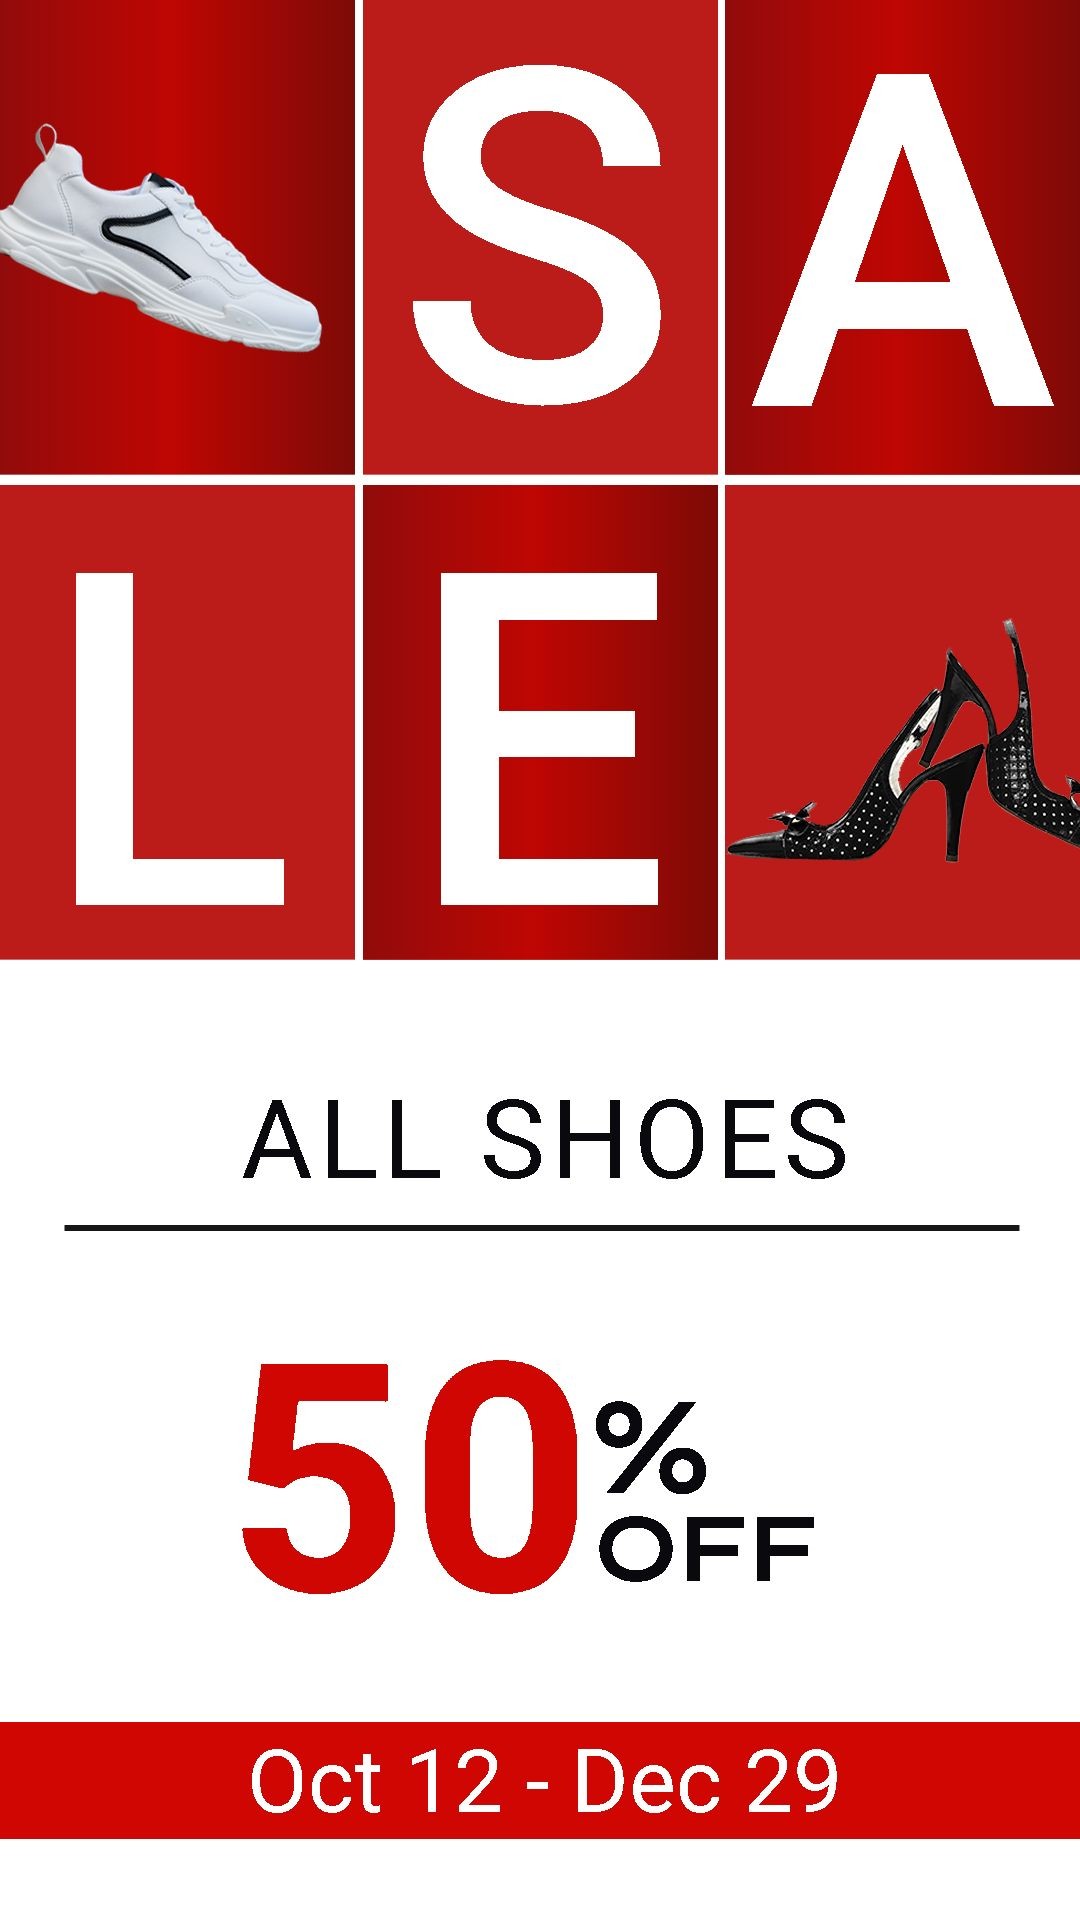 Men's Sports Shoes and Women's High Heels Fashion Sale Promo Ecommerce Story预览效果